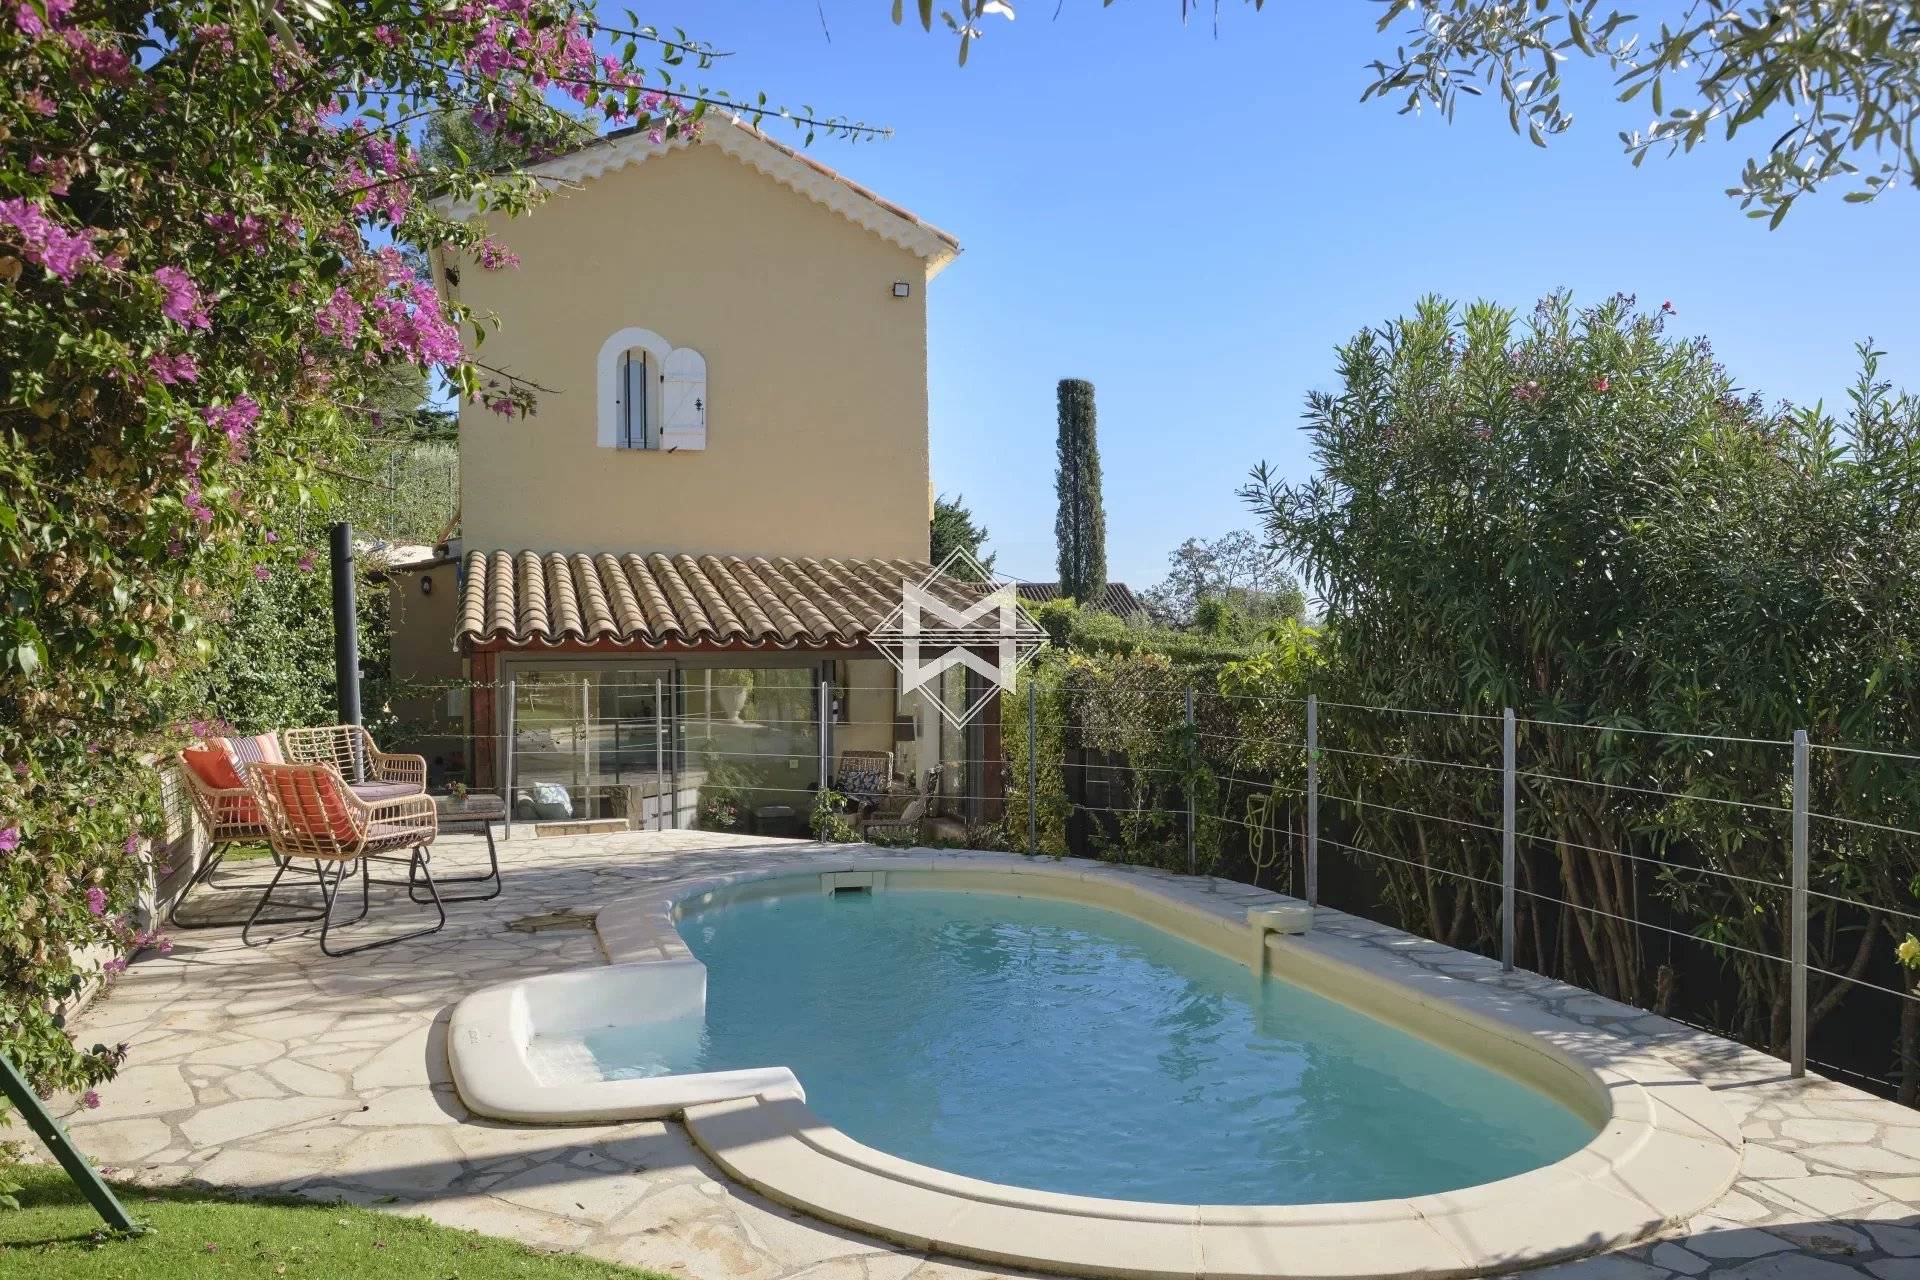 Charming villa within walking distance of the village